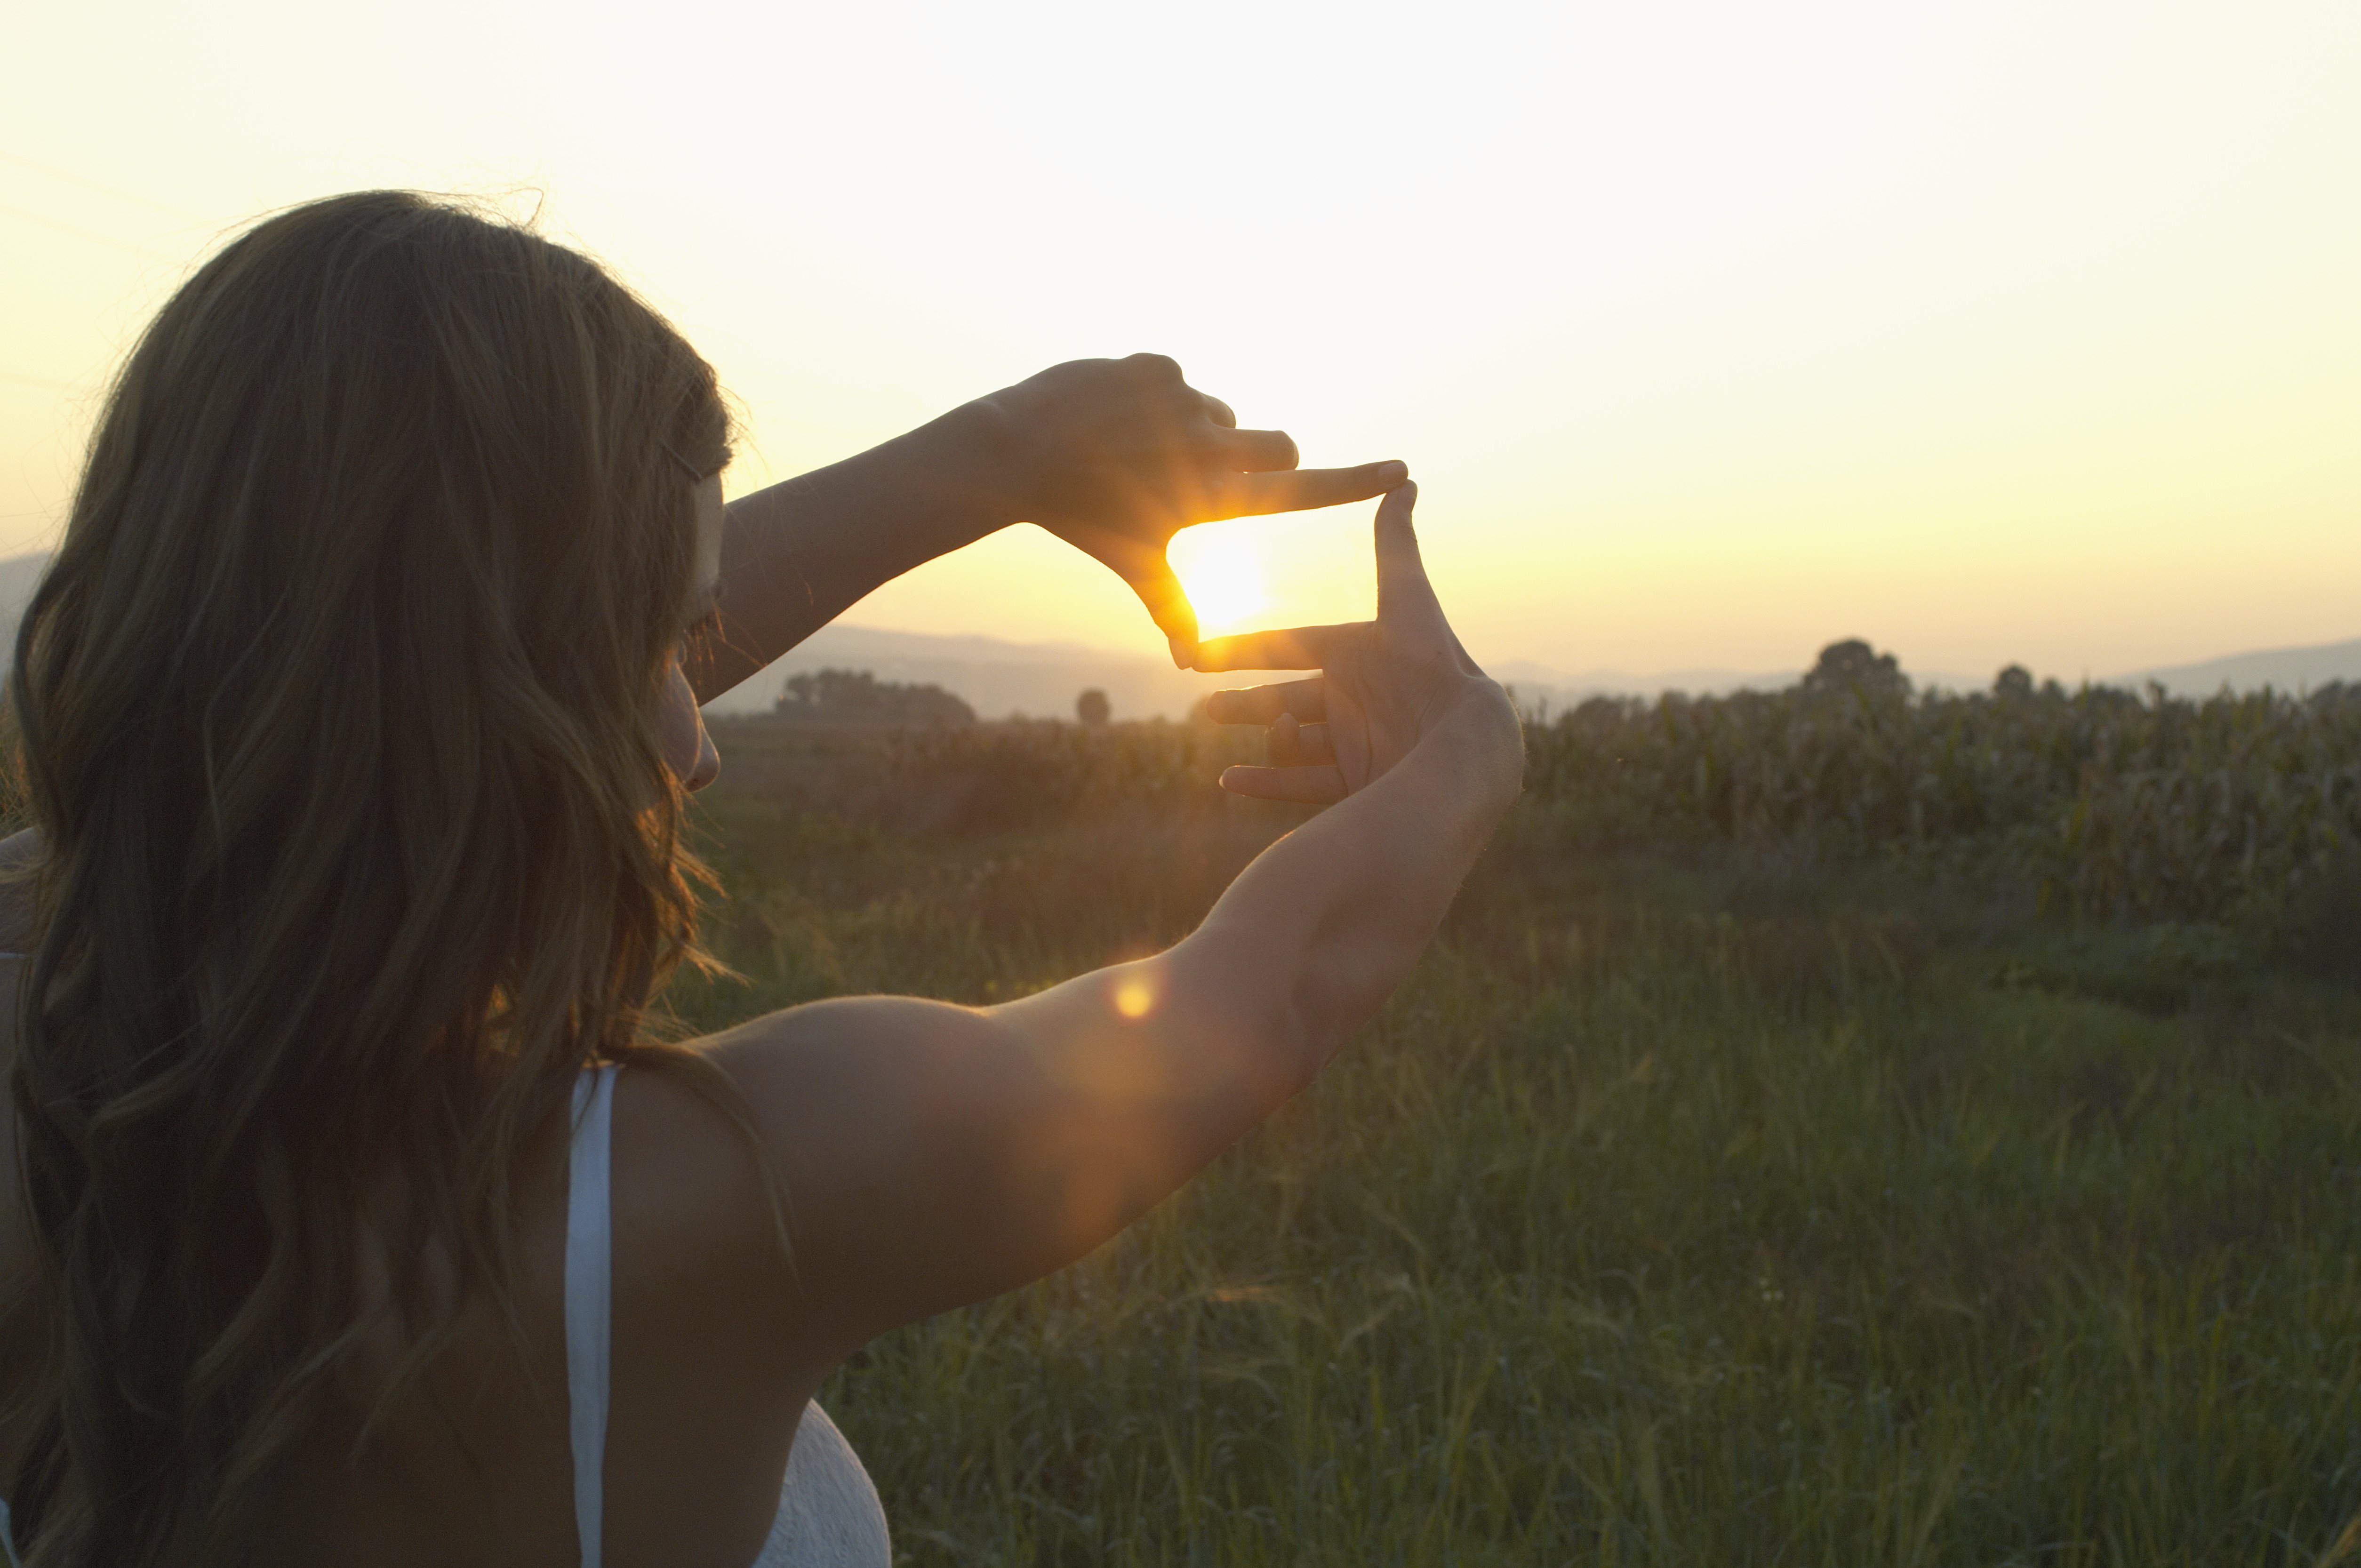 Teenage girl (16-18) outdoors, framing sun with fingers